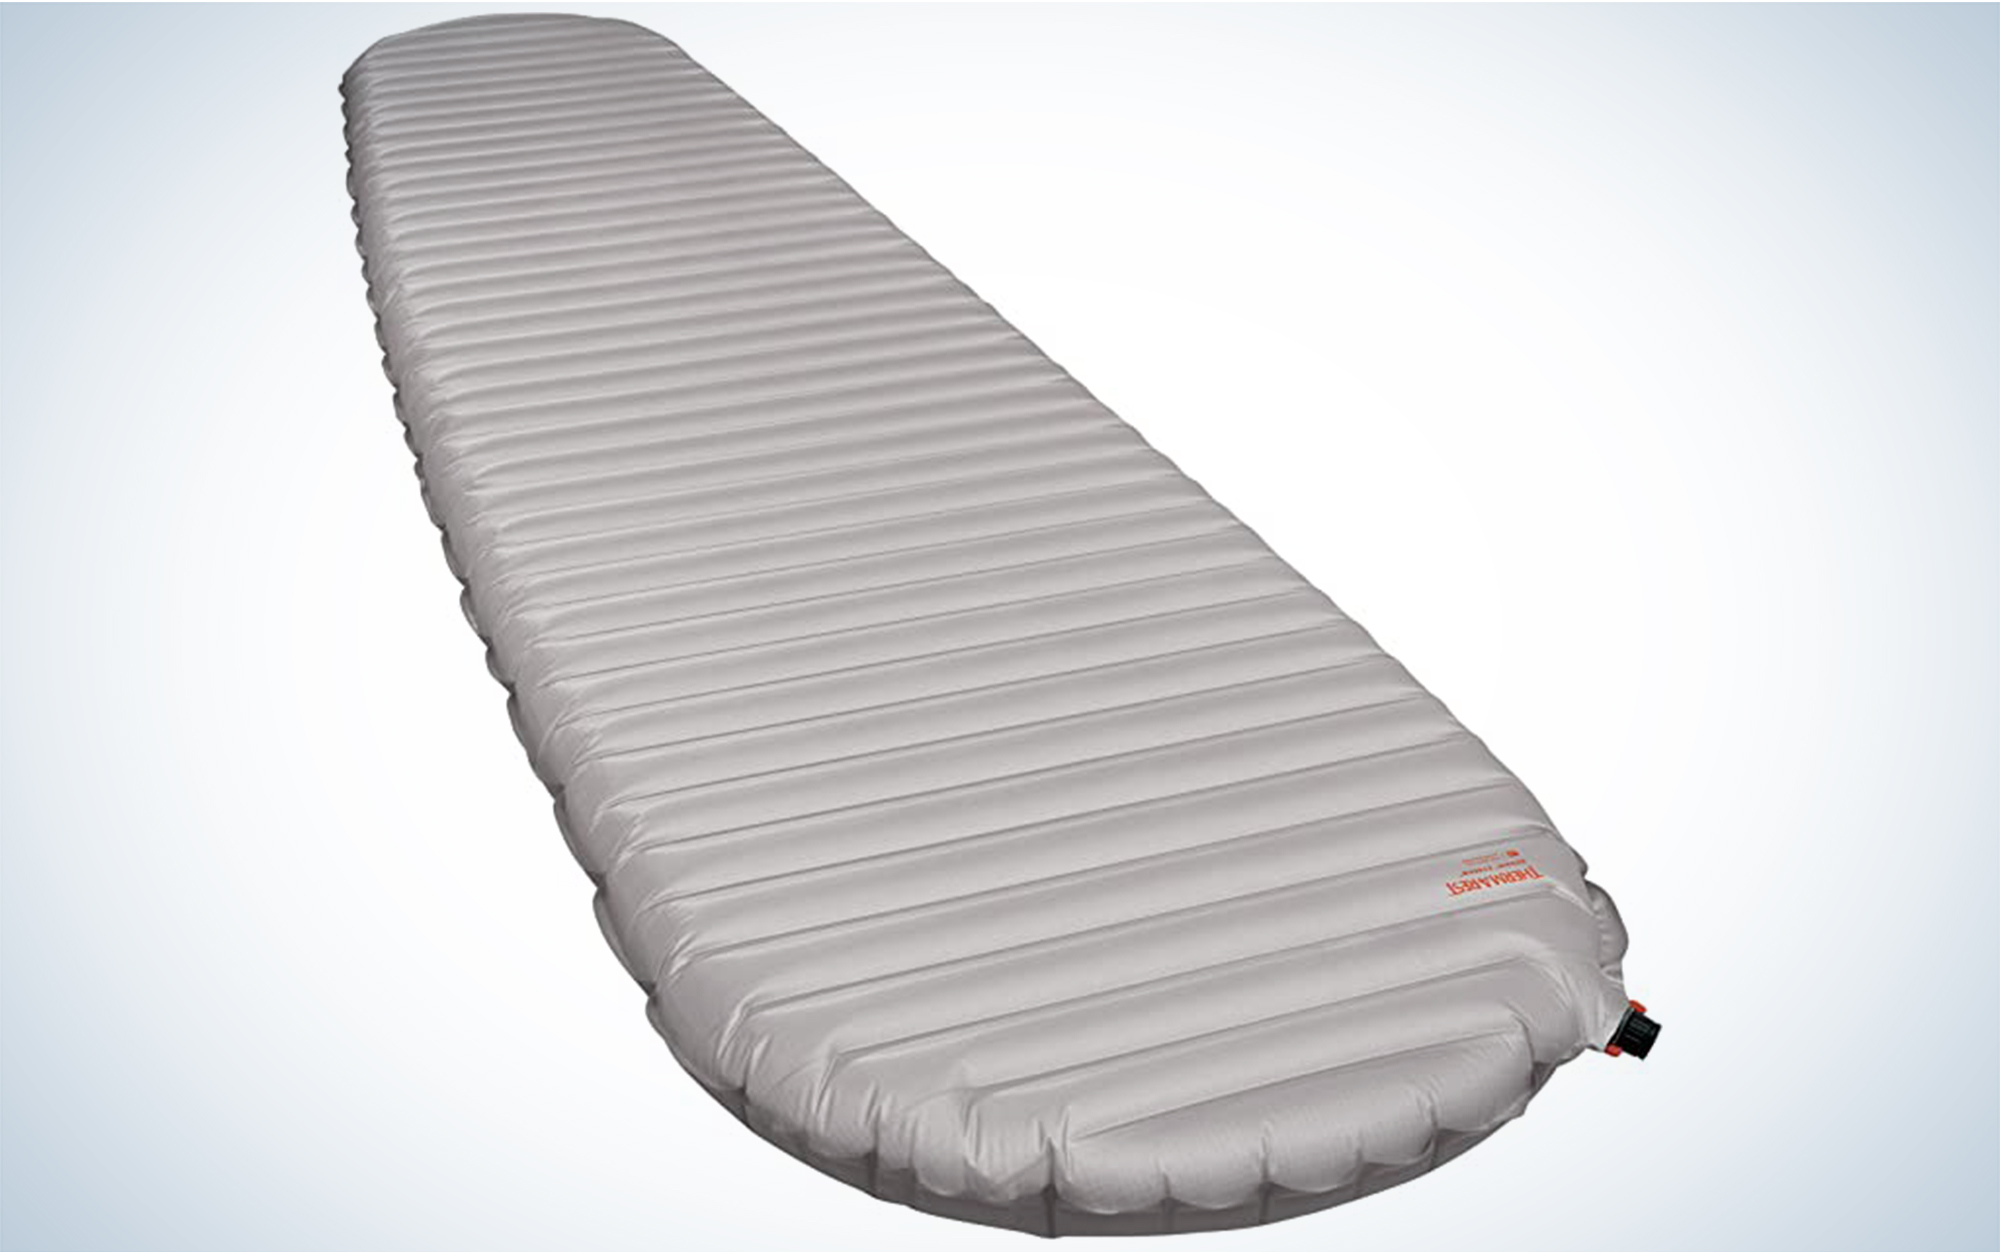 The Therm-a-Rest NeoAir XTherm is the best sleeping pad for winter.